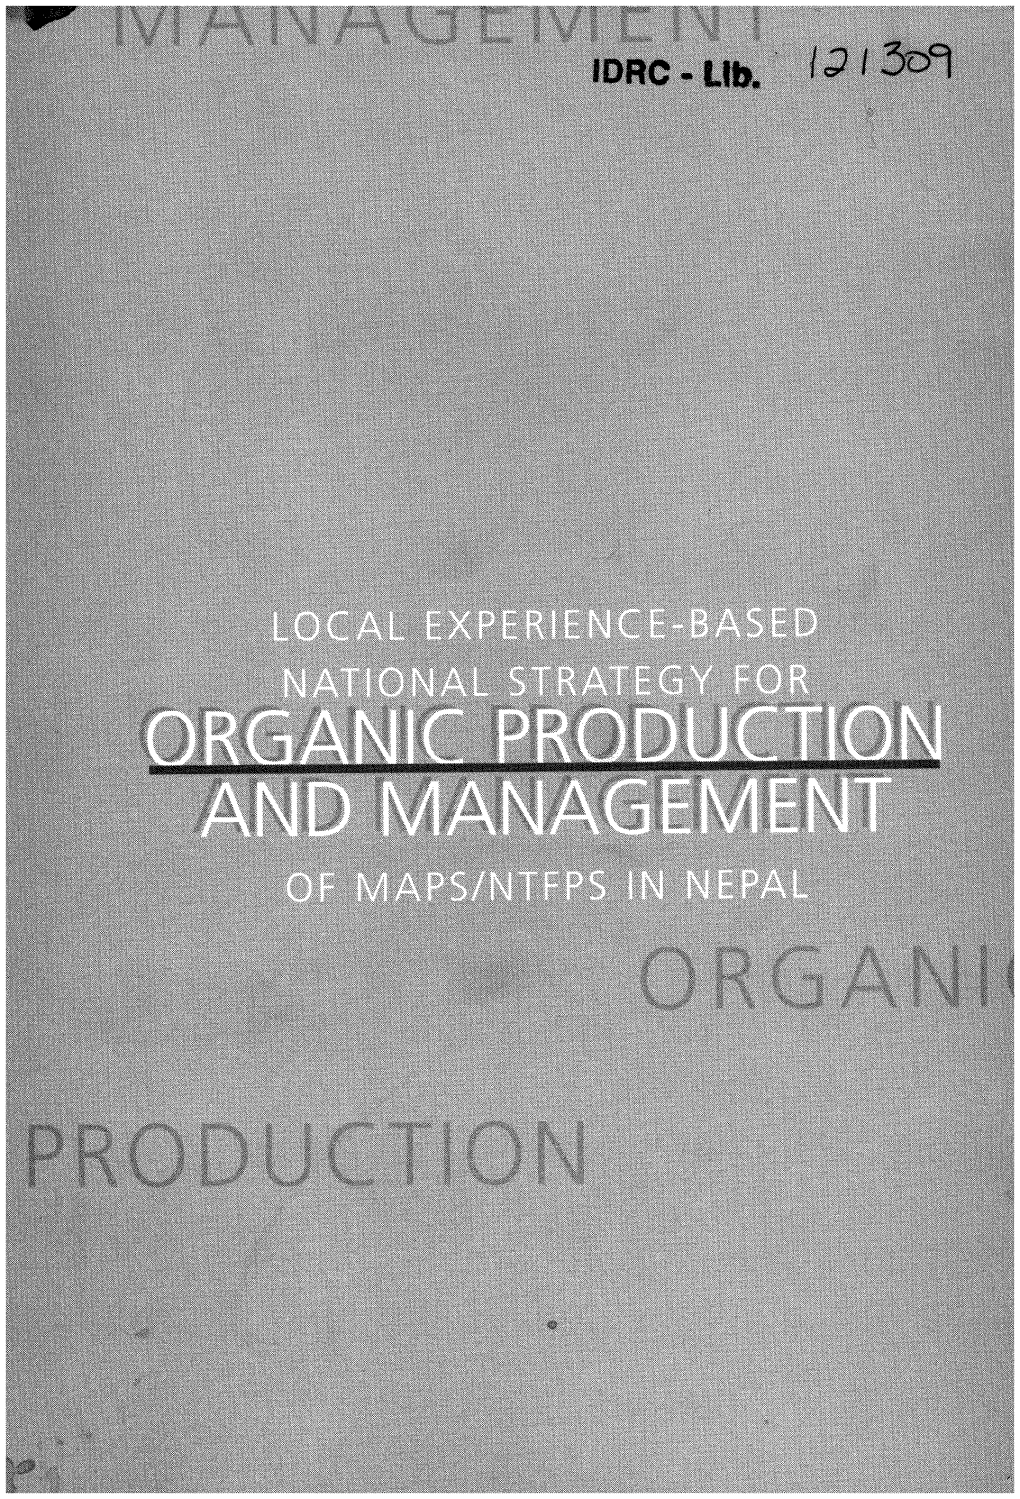 LOCAL EXPERIENCE-BASED NATIONAL STRATEGY for ORGANIC PRODUCTION and MANAGEMENT of Maps/Ntfps in NEPAL